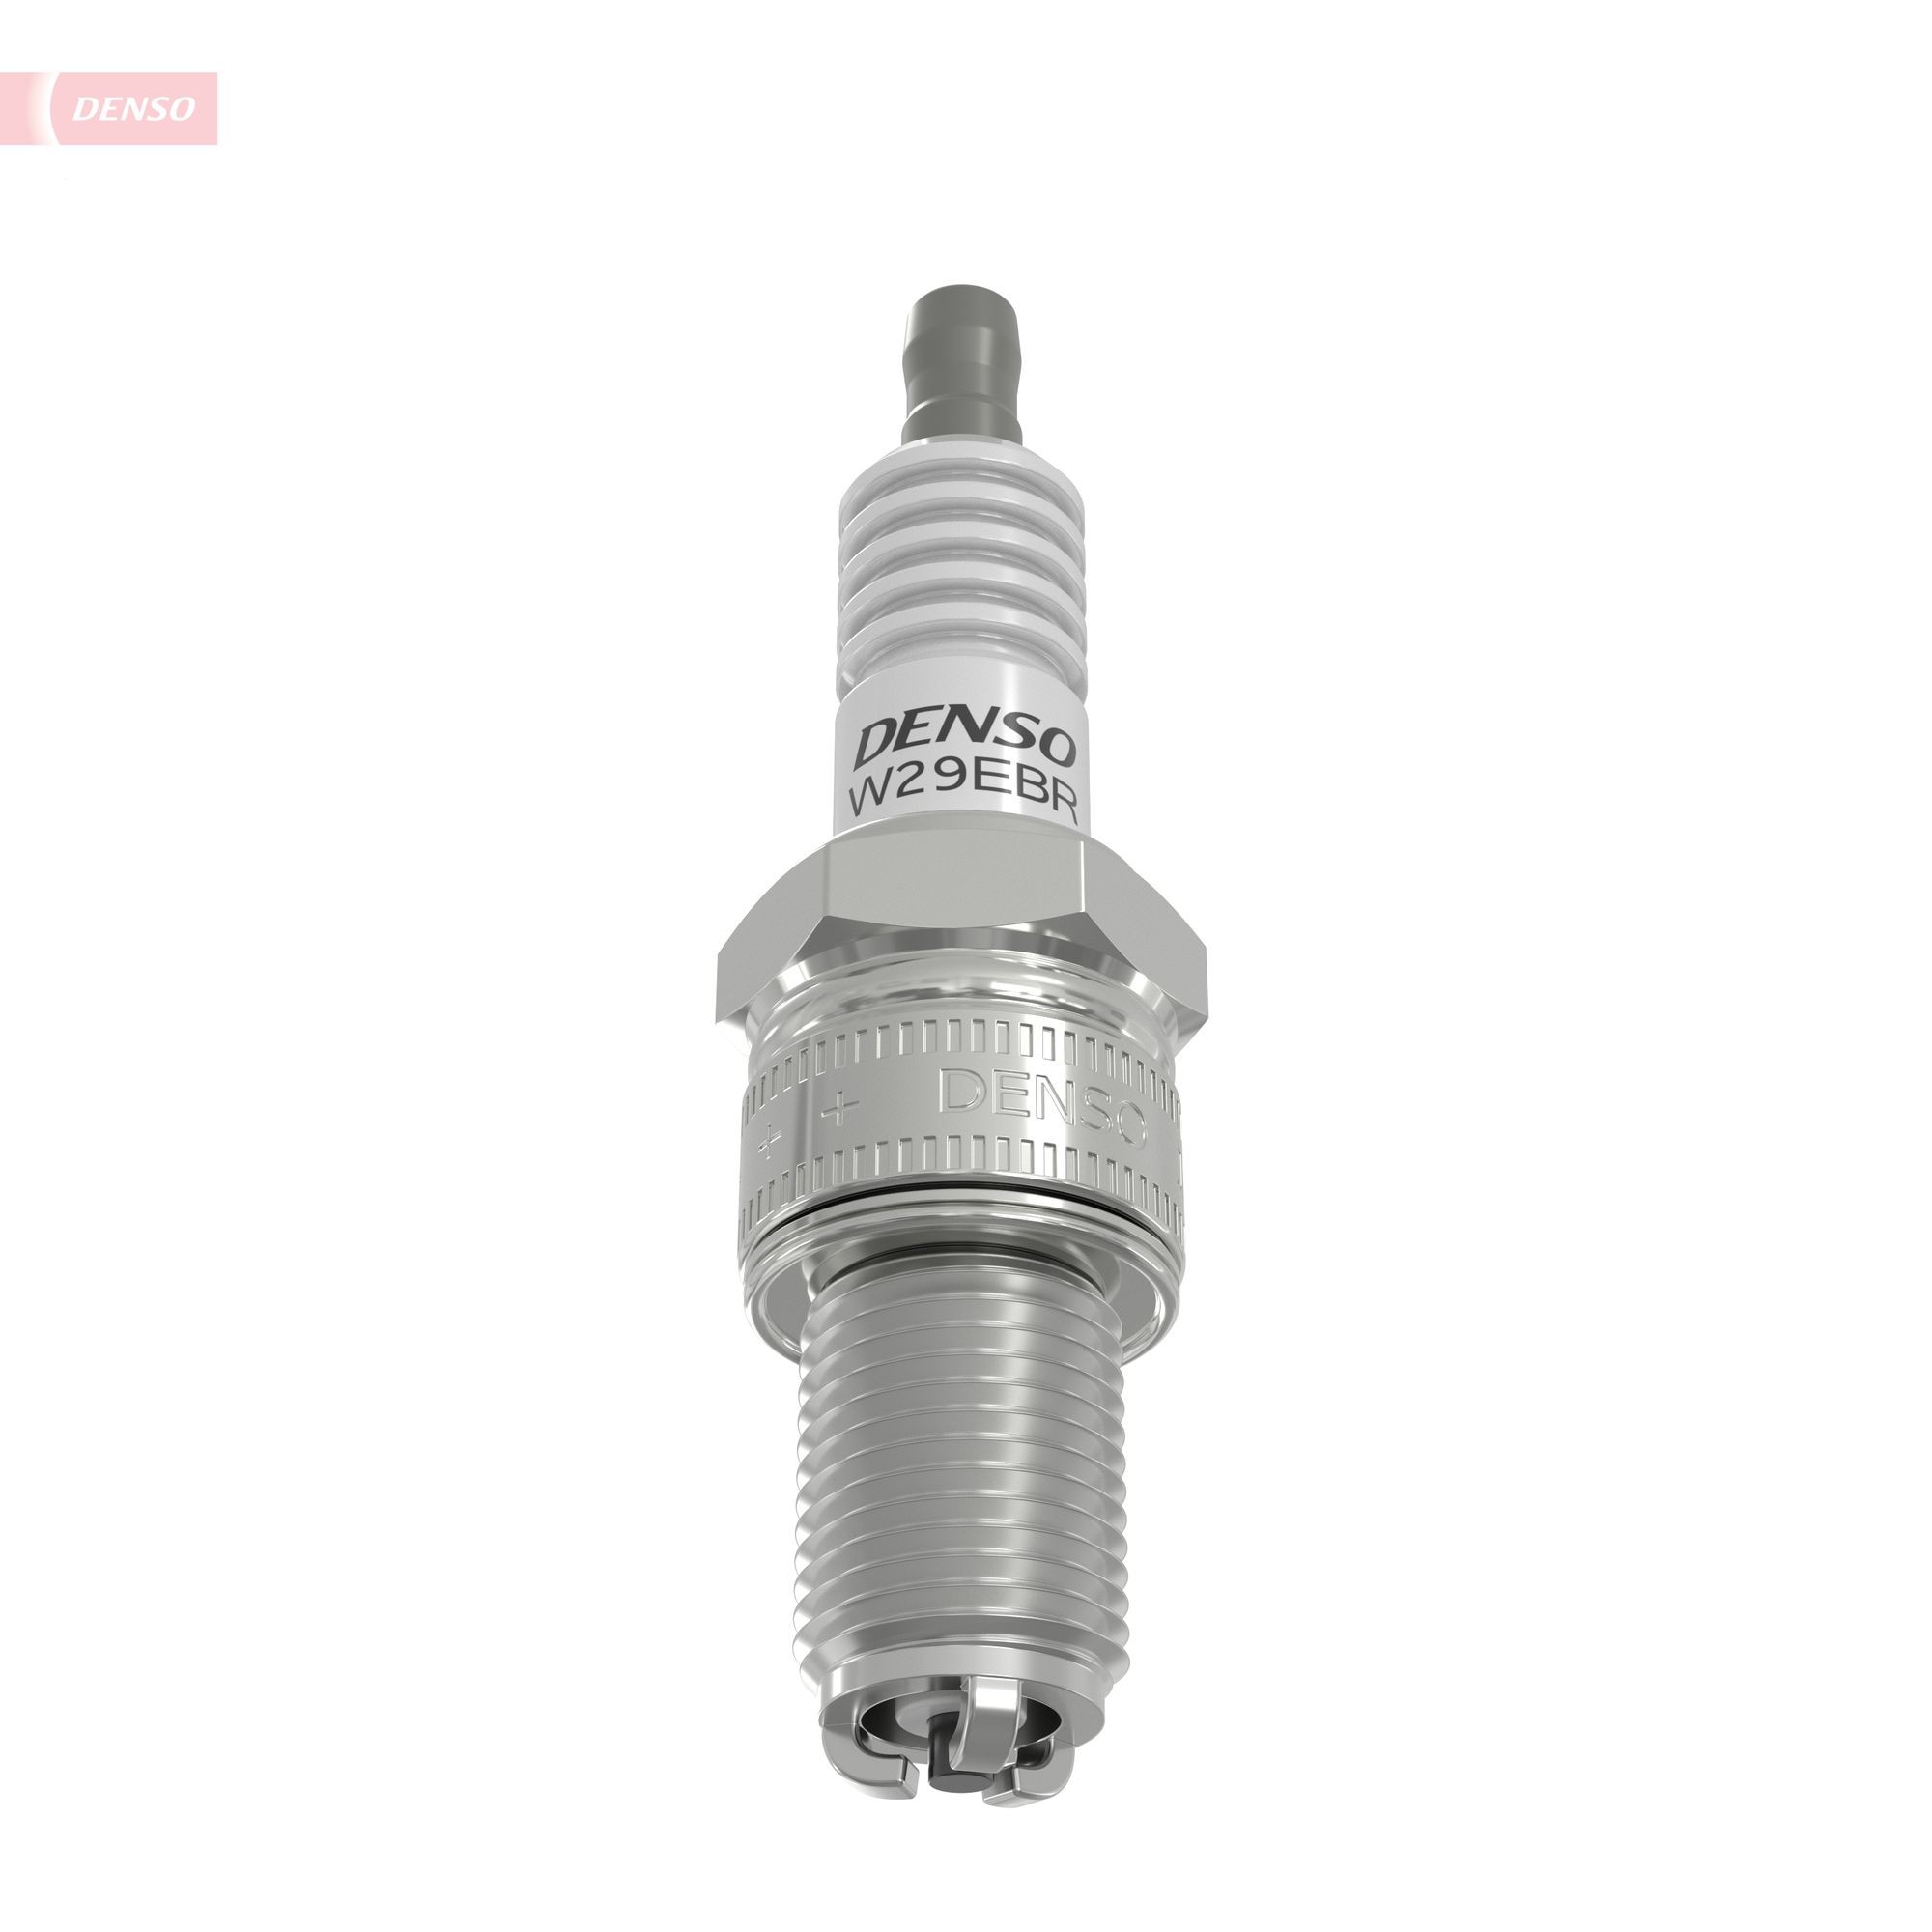 DENSO Spark plugs 3310 buy online